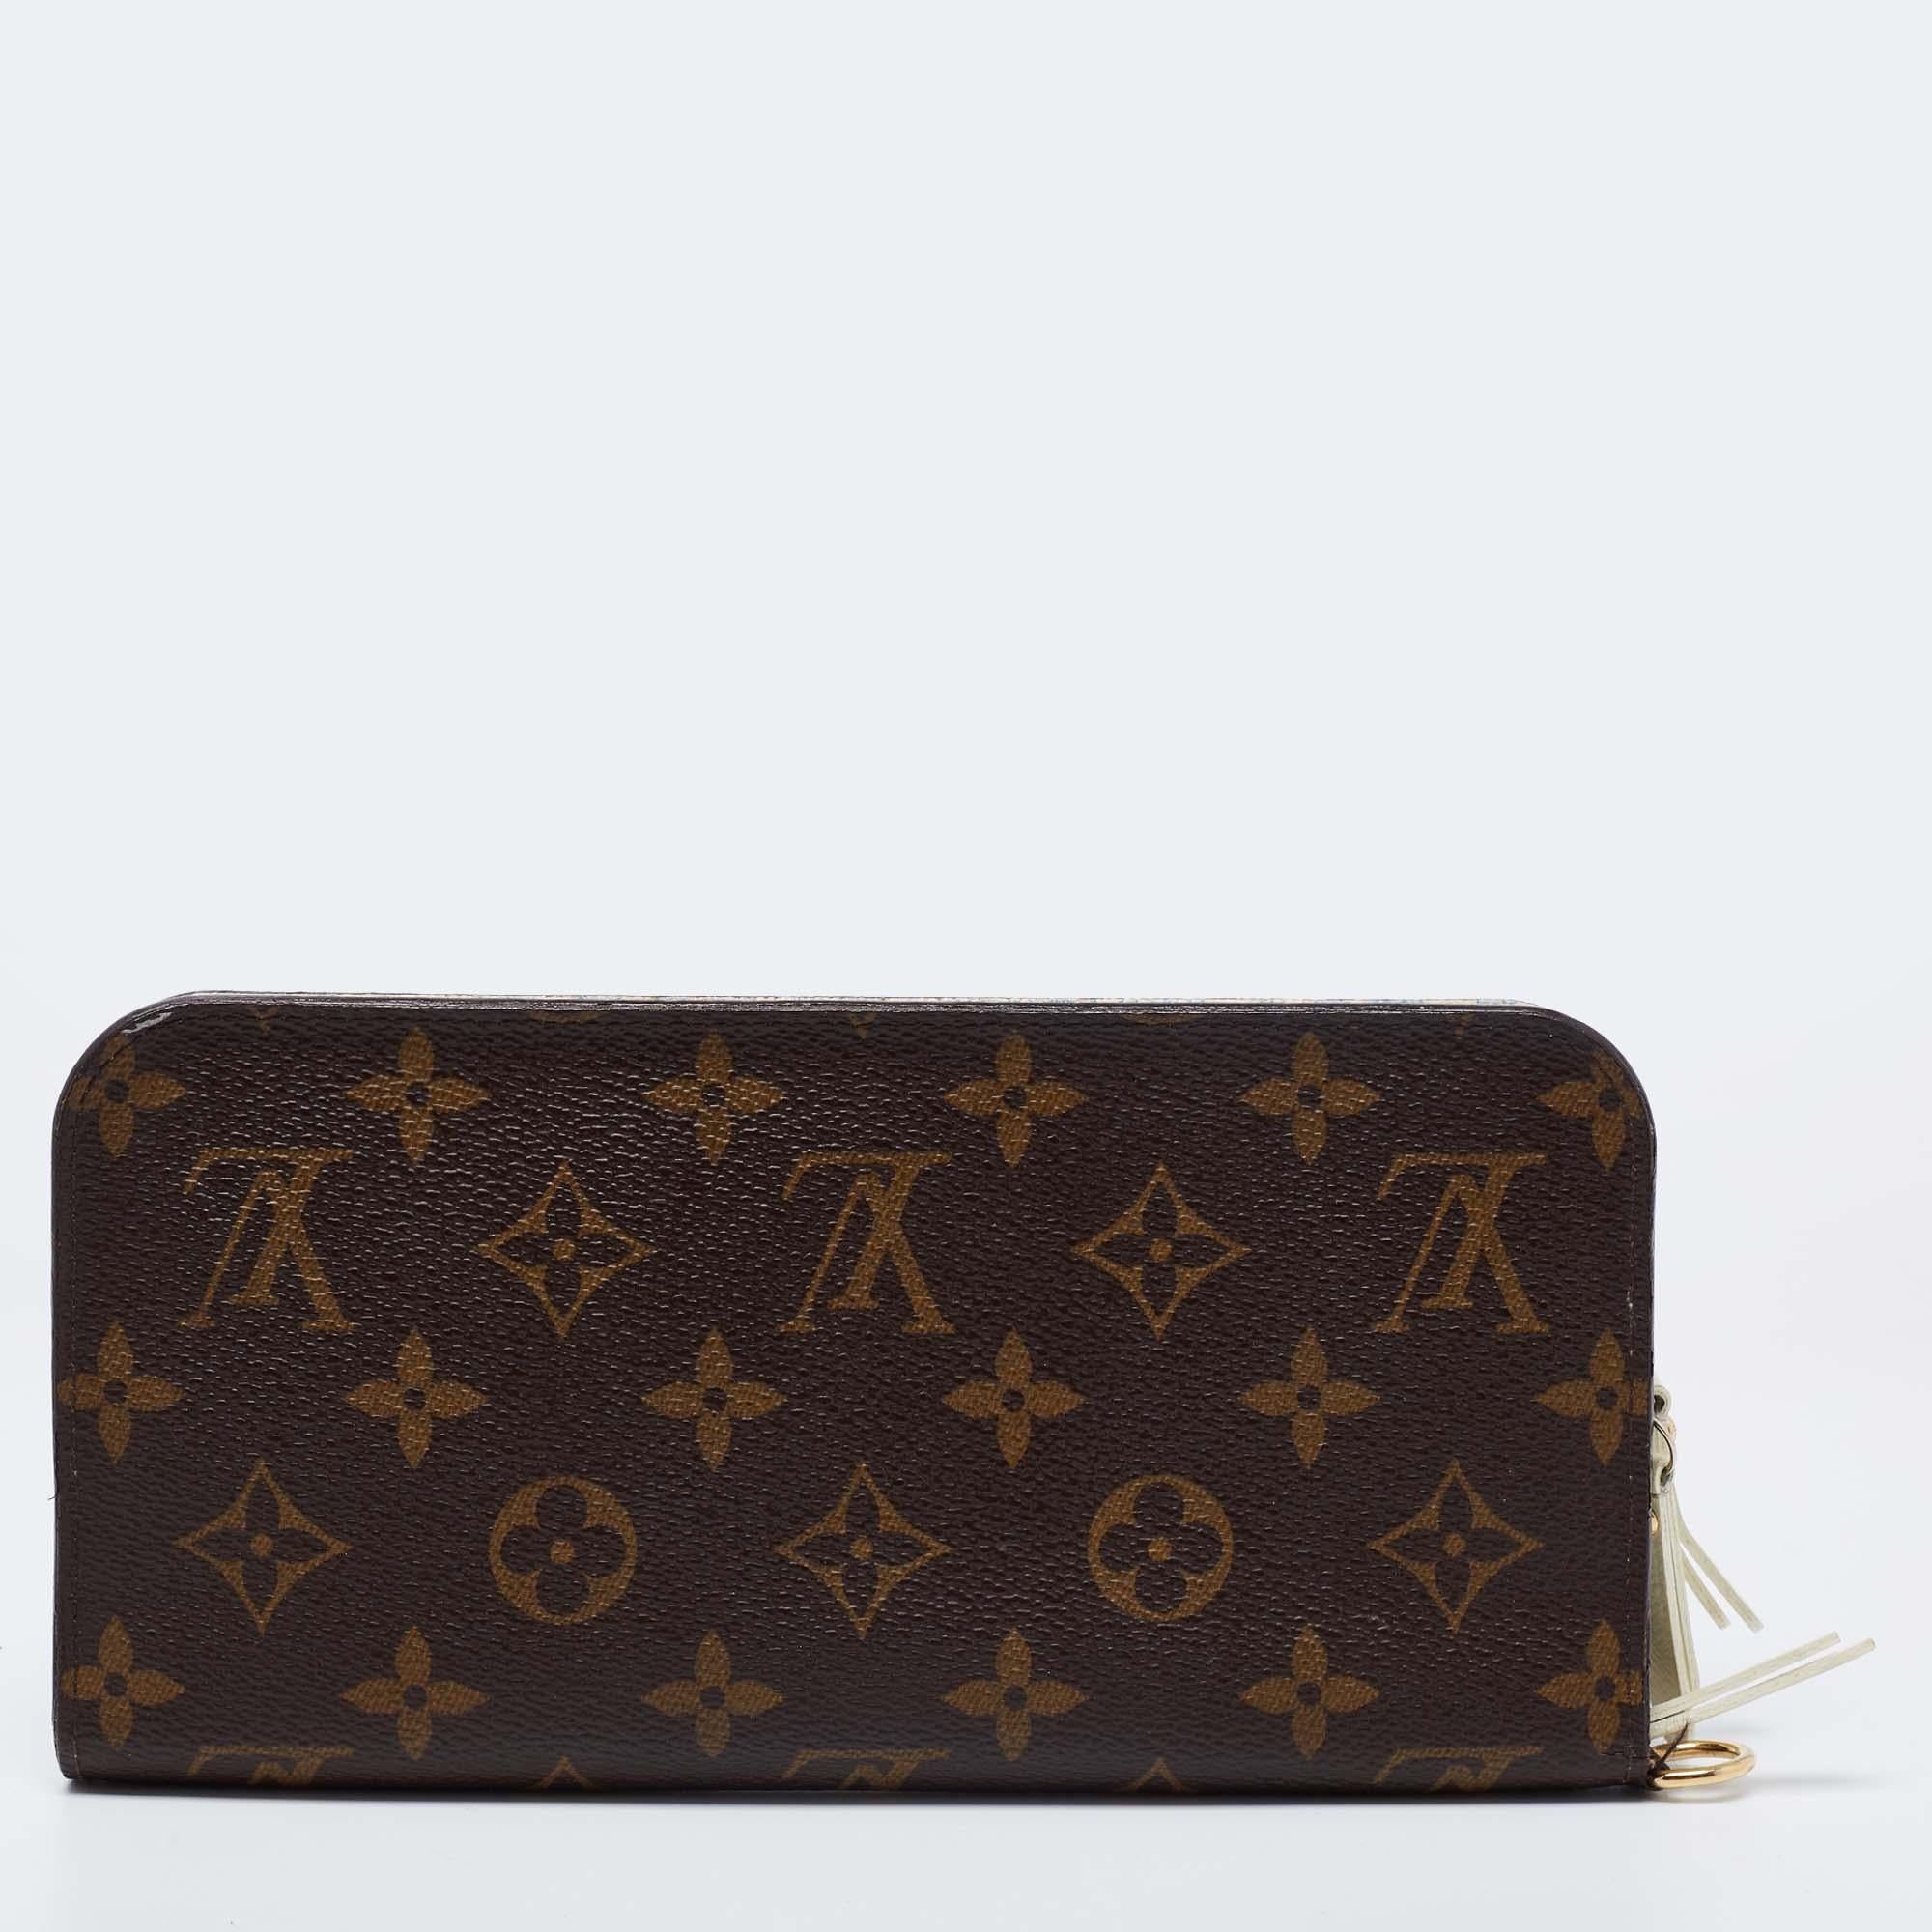 This Louis Vuitton zippy organizer is a functional and chic accessory to own. Crafted from the signature Monogram canvas, it comes with a statement appeal, and its interior is lined with leather.

